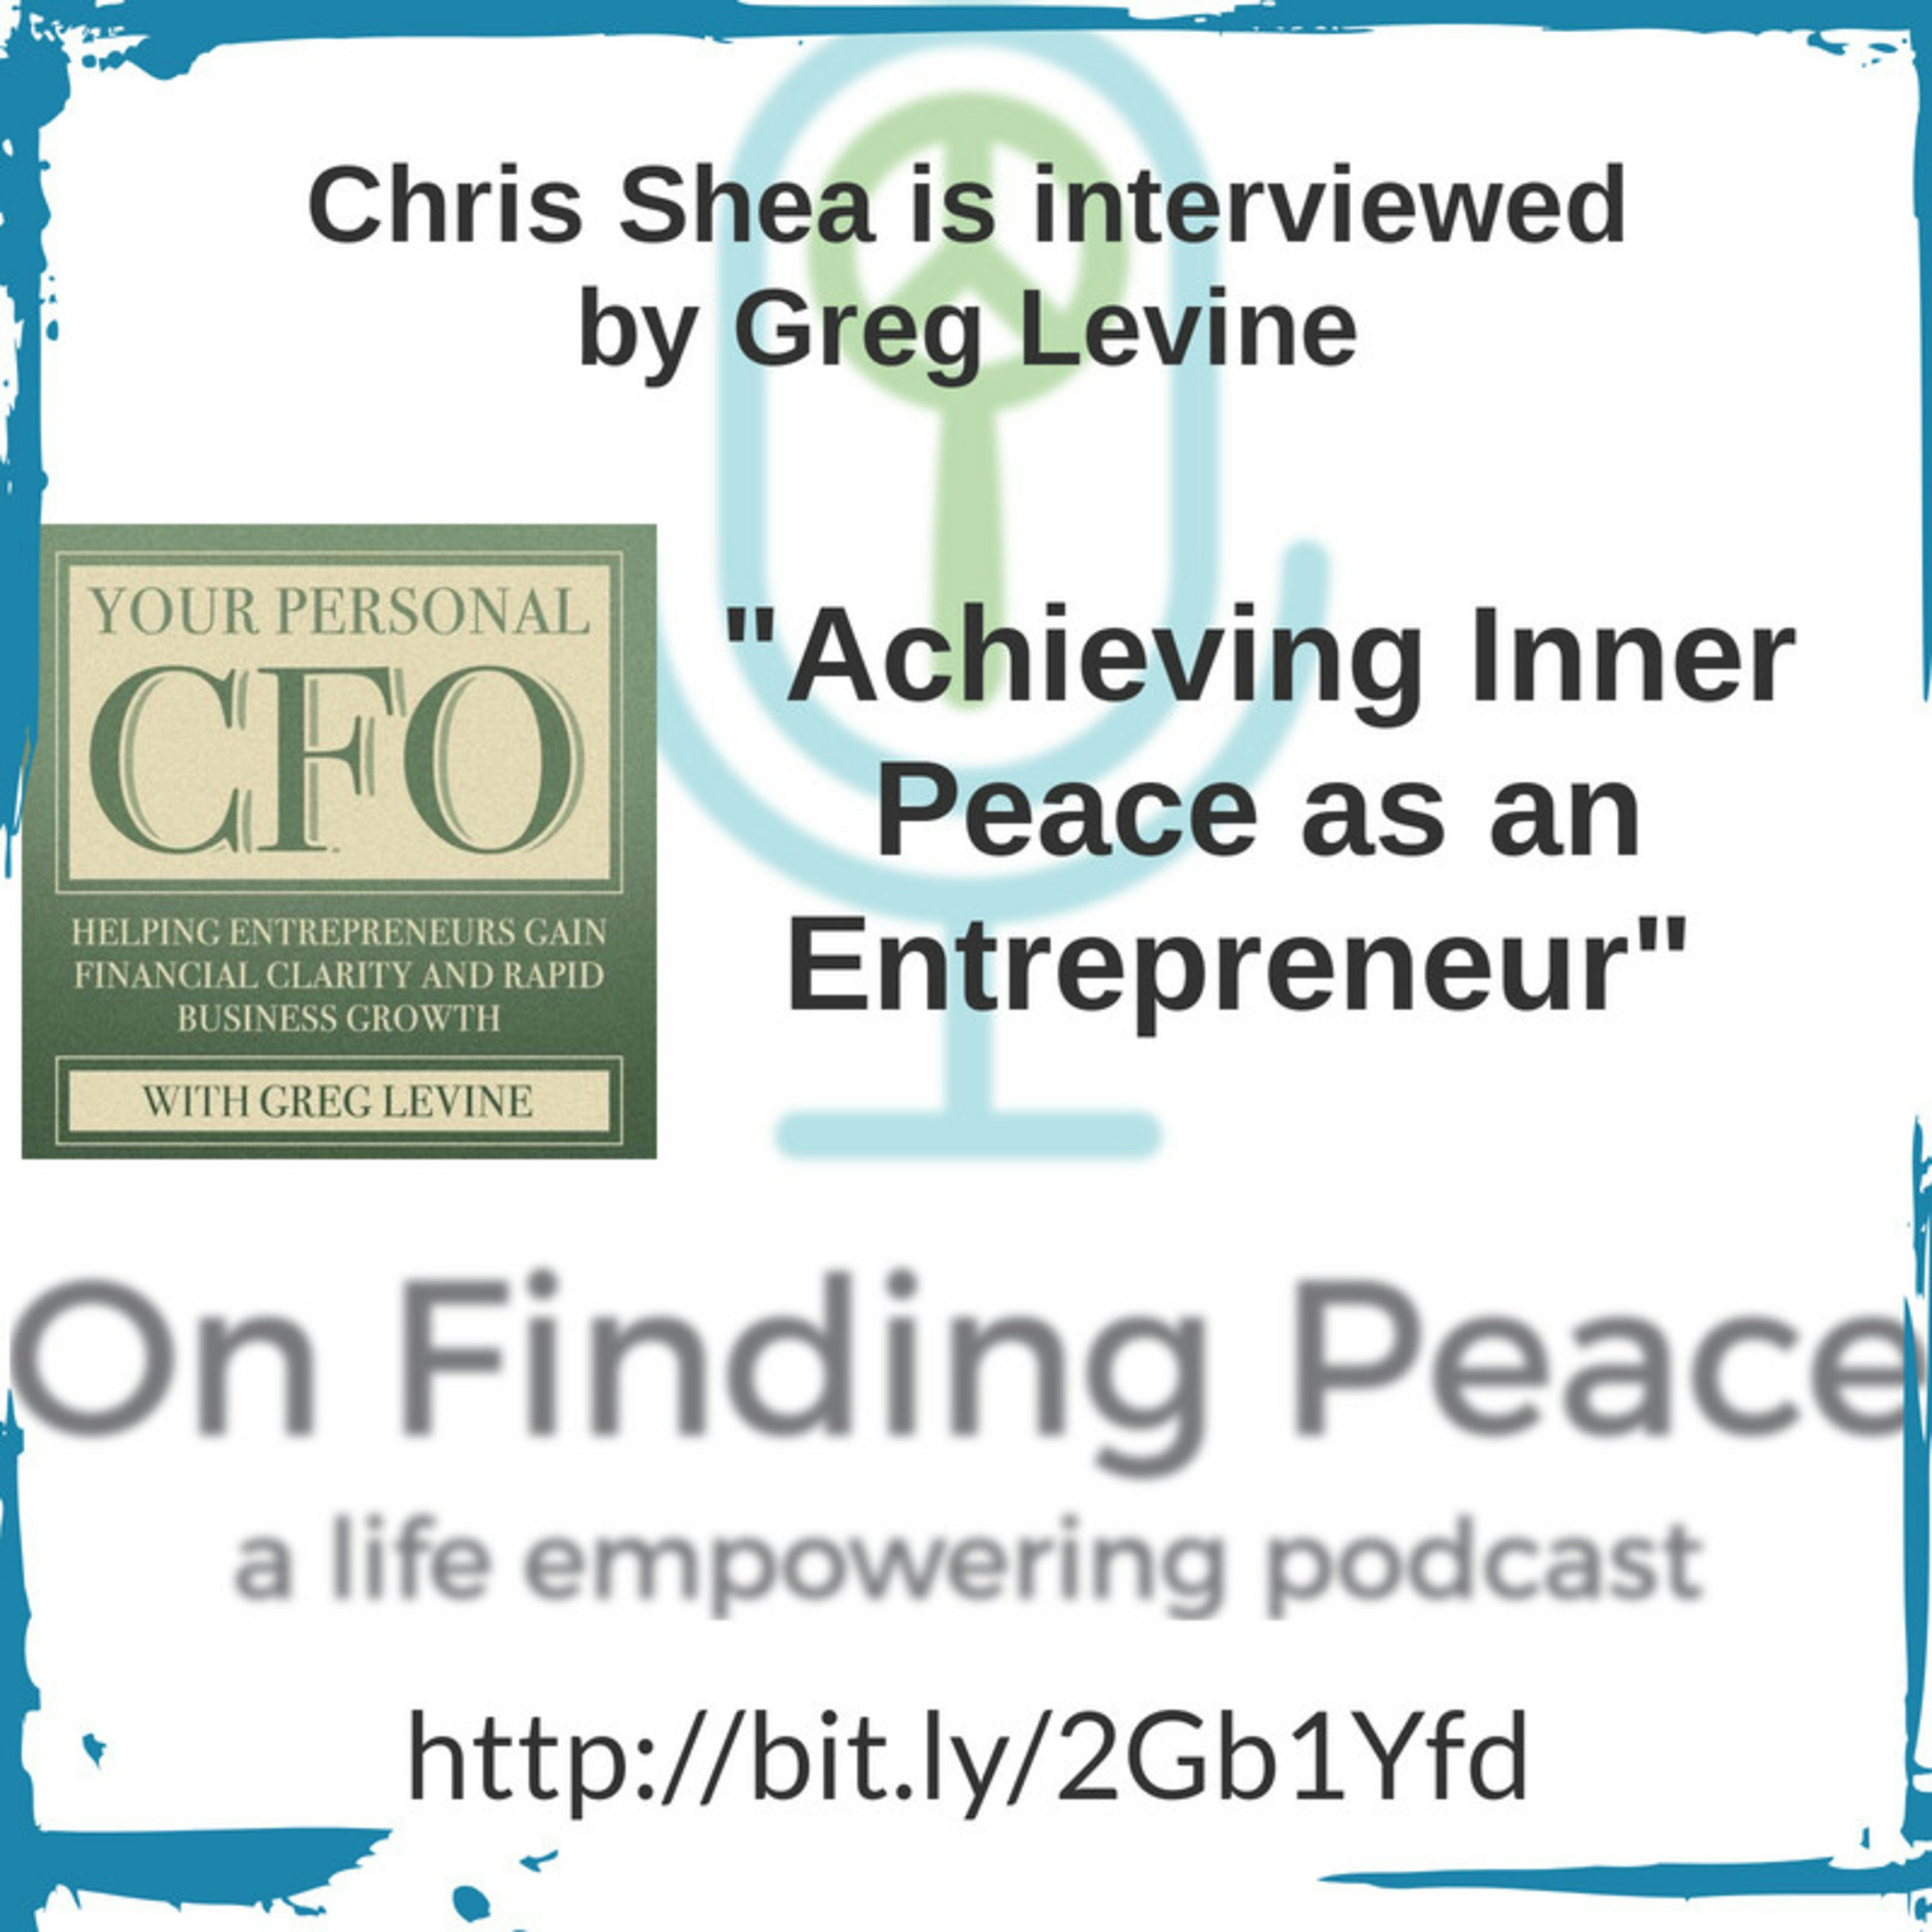 An Interview By Greg Levine - Your Personal CFO